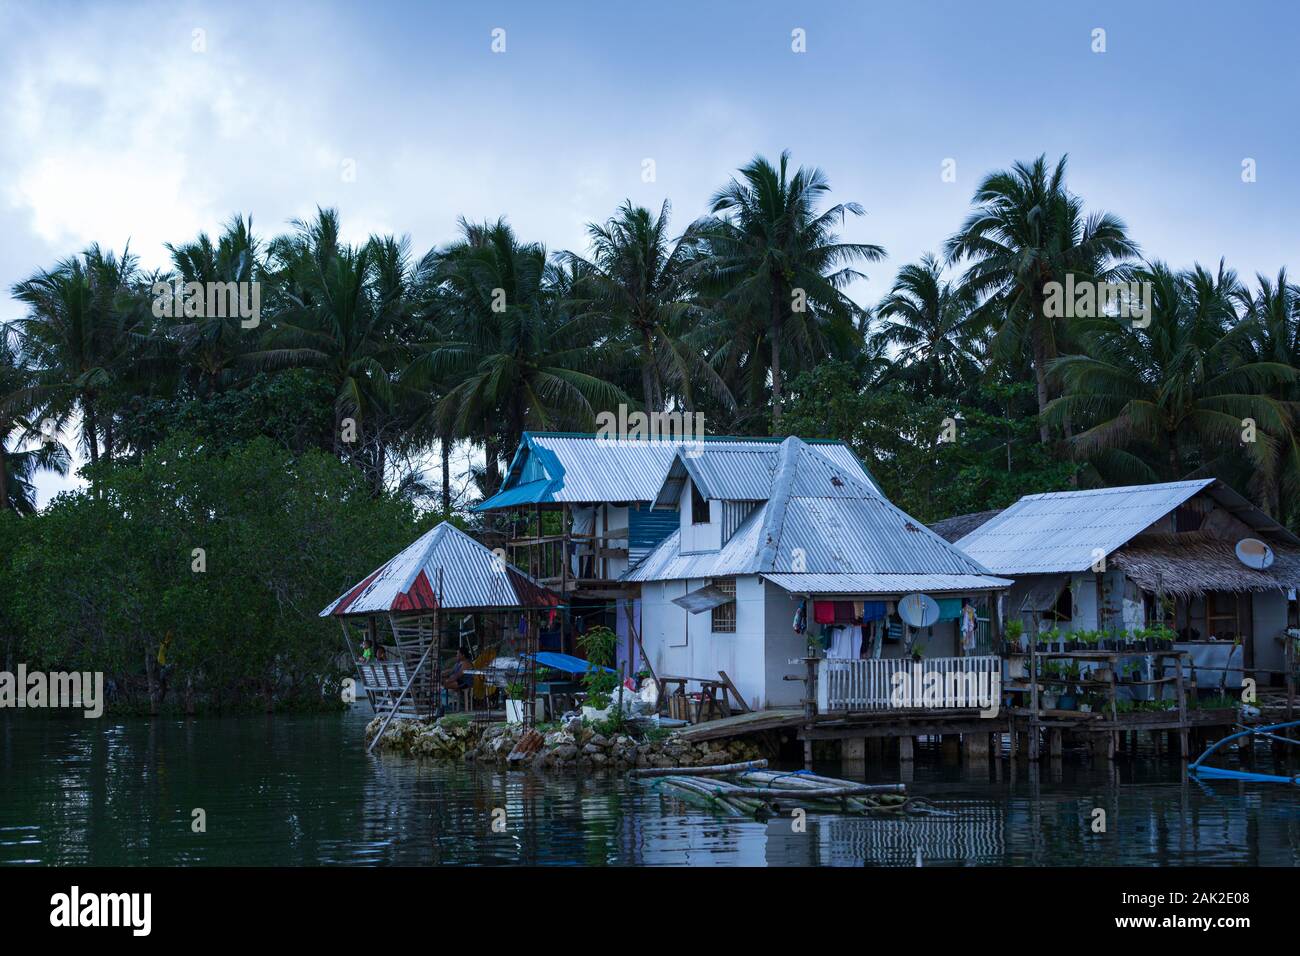 Basic homes on stilts above water in local village Stock Photo